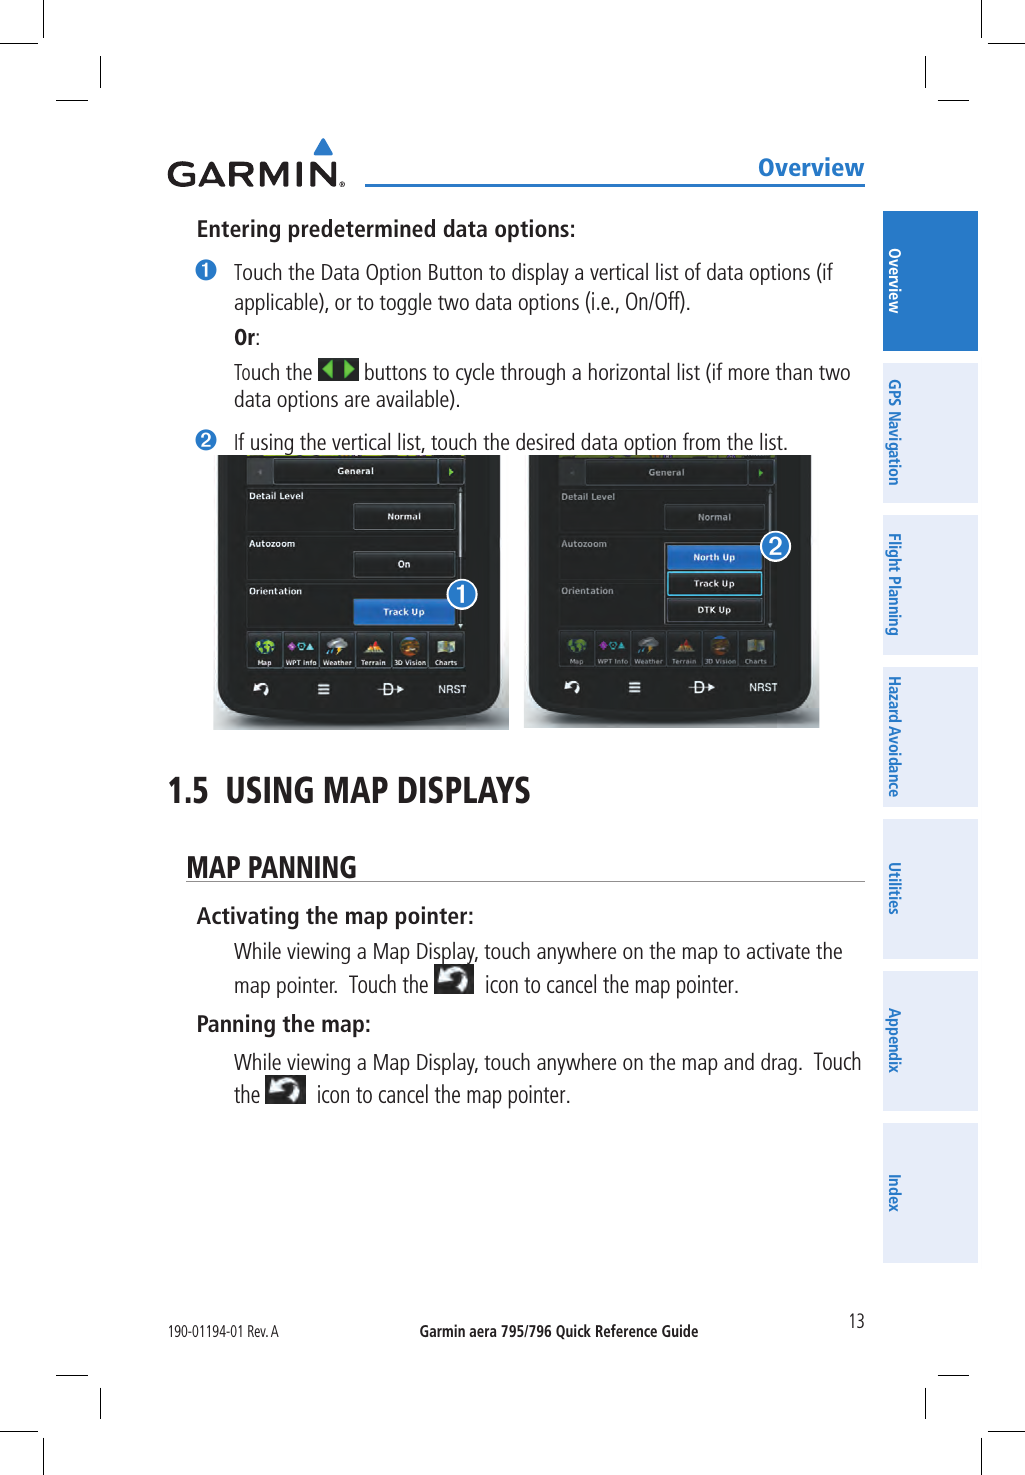 Garmin aera 795/796 Quick Reference Guide190-01194-01 Rev. A 13OverviewOverview GPS Navigation Flight Planning Hazard Avoidance Utilities Appendix IndexEntering predetermined data options:➊ Touch the Data Option Button to display a vertical list of data options (if applicable), or to toggle two data options (i.e., On/Off). Or: Touch the   buttons to cycle through a horizontal list (if more than two data options are available).➋ If using the vertical list, touch the desired data option from the list.➊➋1.5  USING MAP DISPLAYSMAP PANNINGActivating the map pointer: While viewing a Map Display, touch anywhere on the map to activate the map pointer.  Touch the   icon to cancel the map pointer.Panning the map: While viewing a Map Display, touch anywhere on the map and drag.  Touch the   icon to cancel the map pointer.